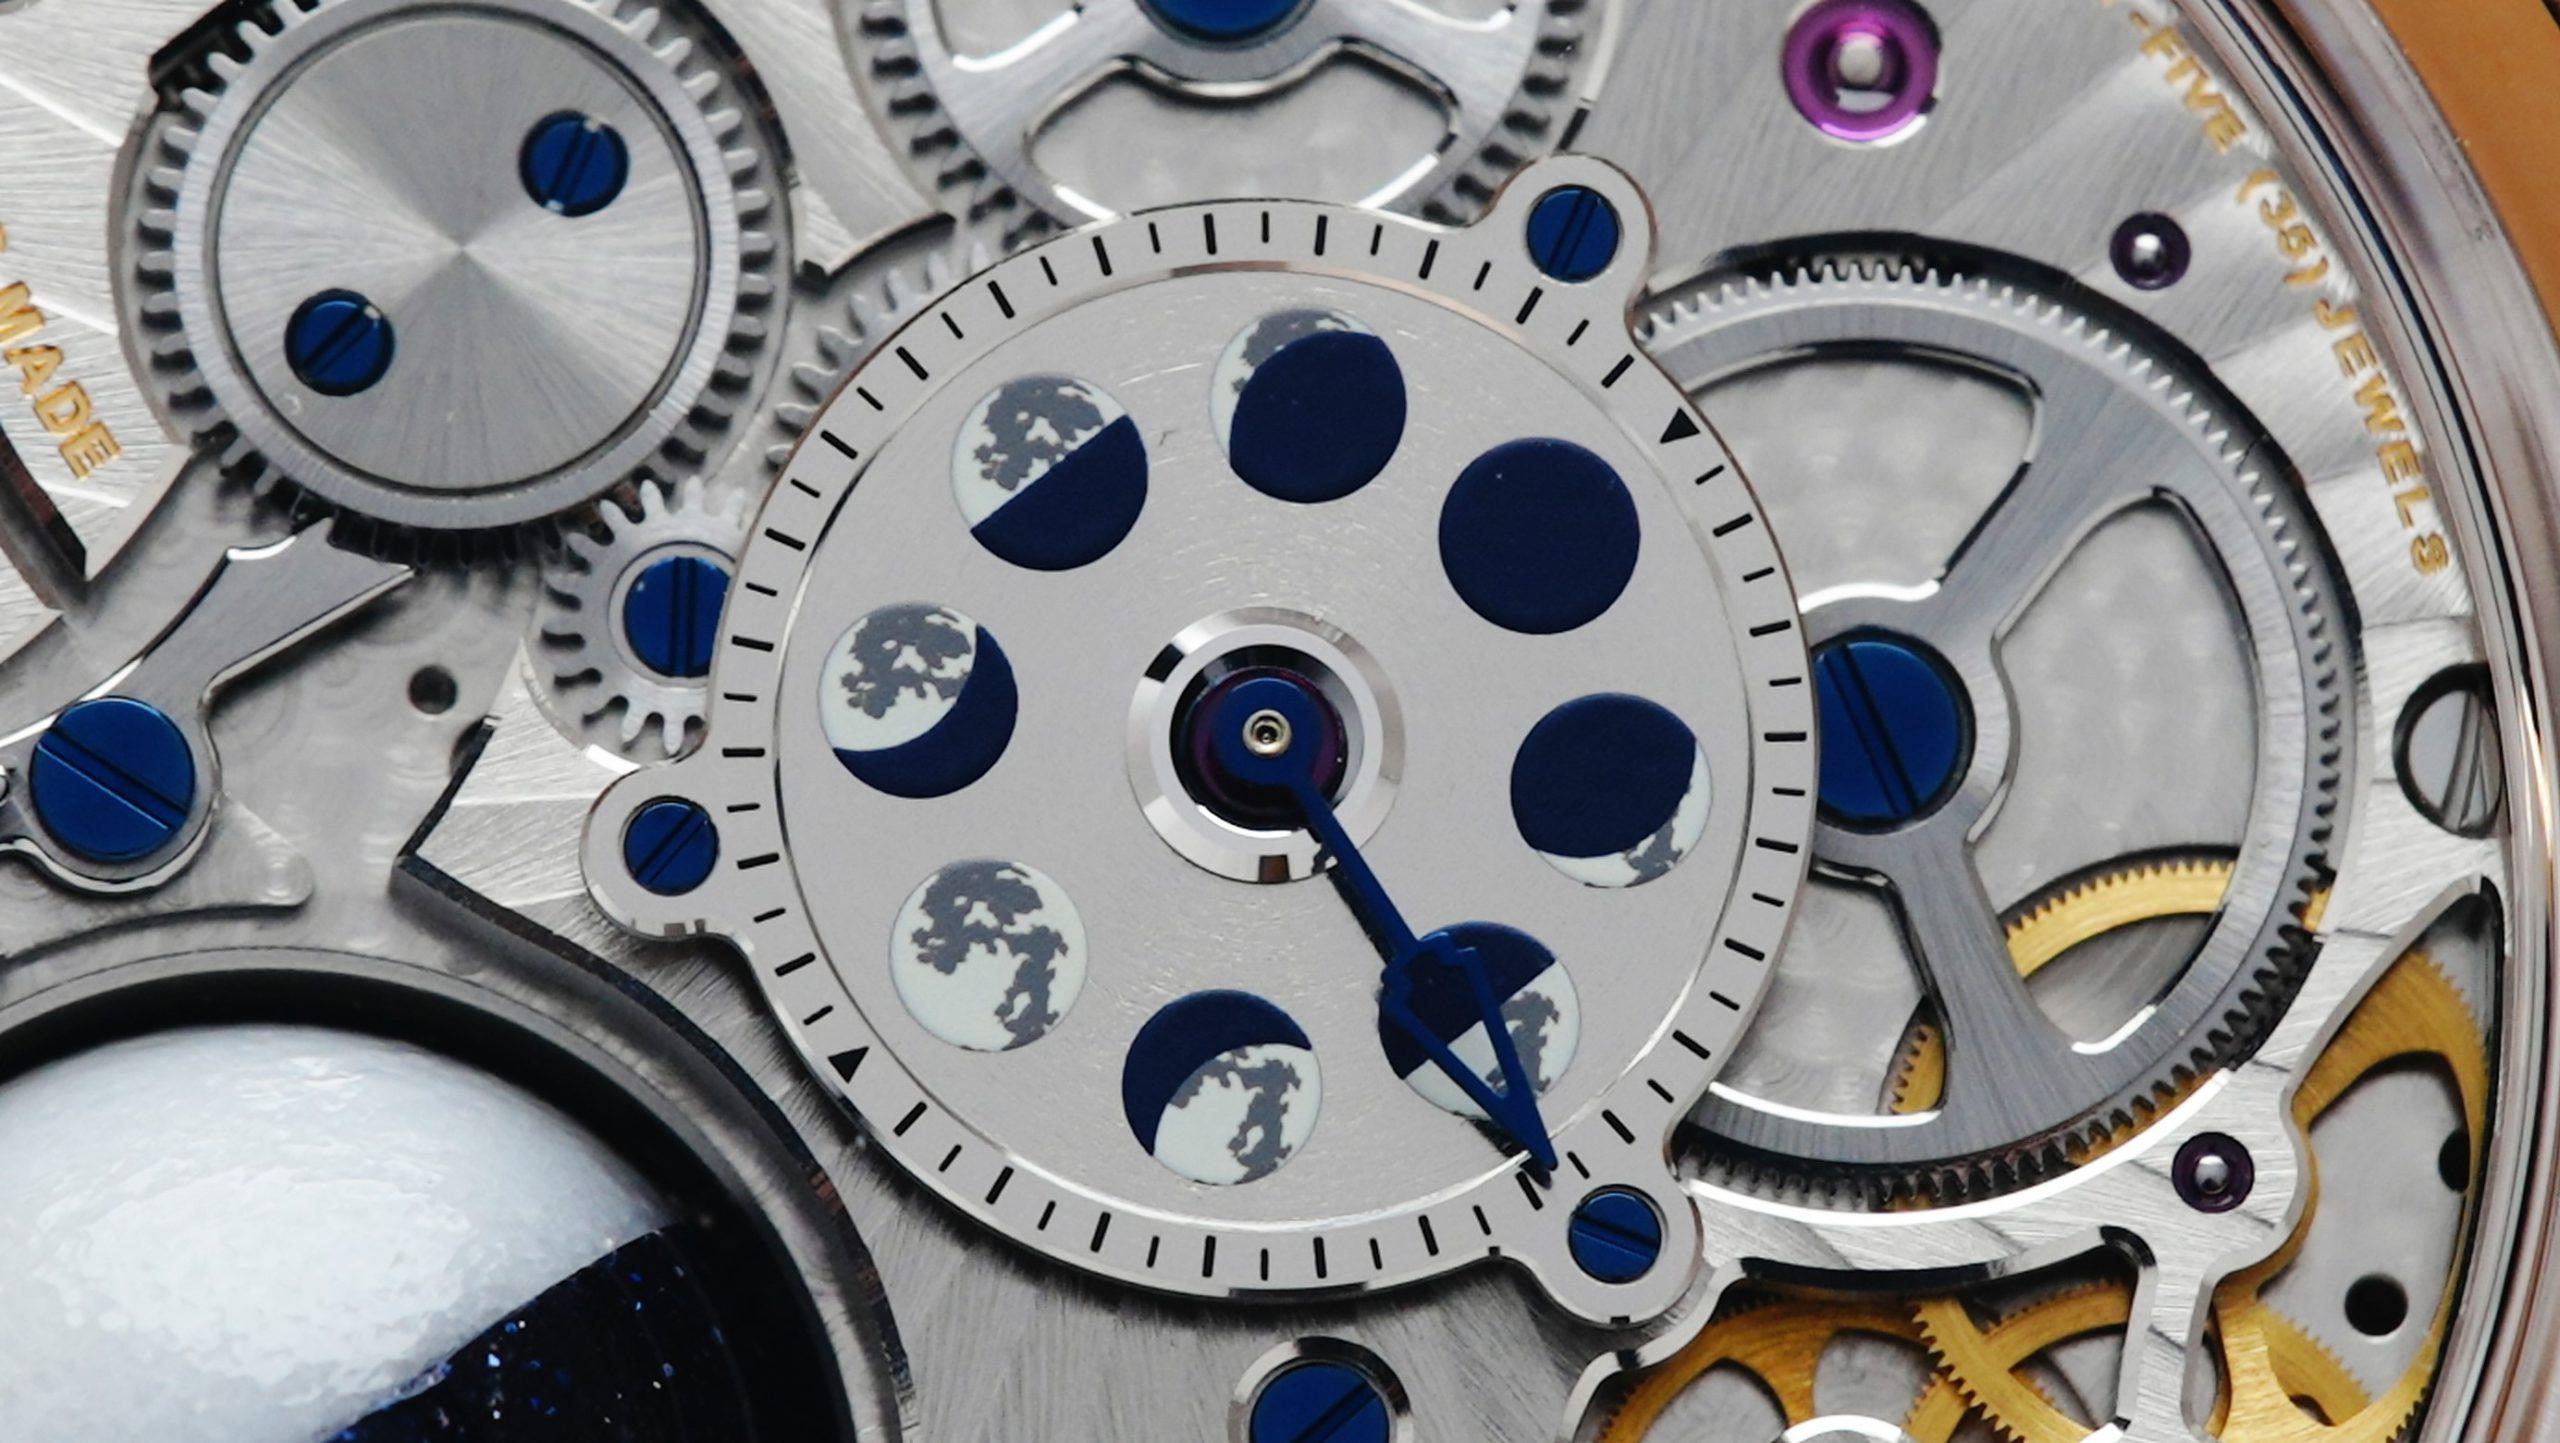 Back side of the Arnold & Son Luna Magna 28 Pieces Limited Edition 3D Moon watch movement.